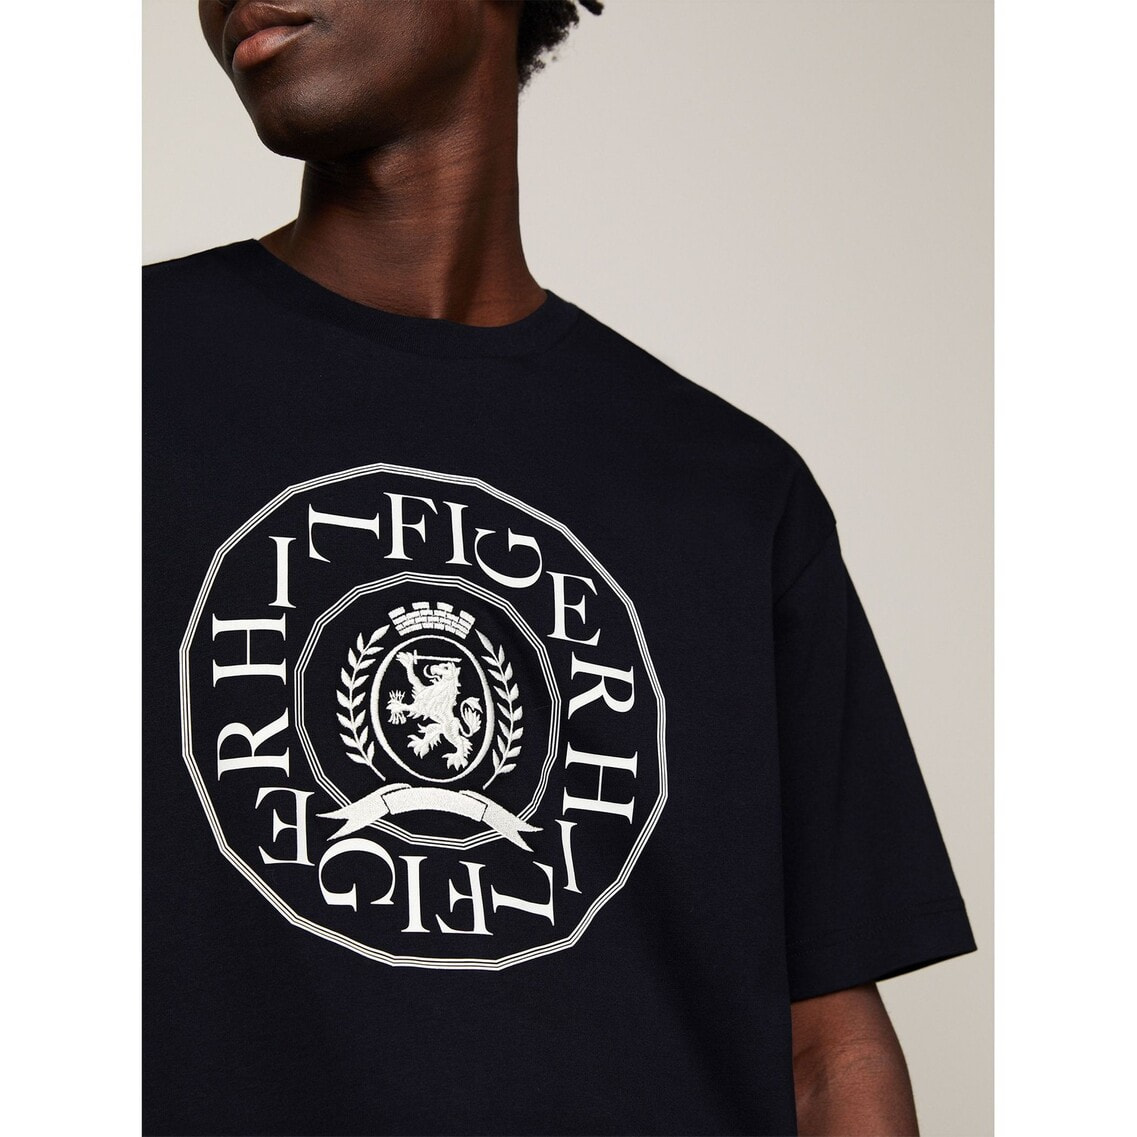 TOMMY HILFIGER COLLECTION アーカイブヒルフィガーTシャツ | TOMMY ...